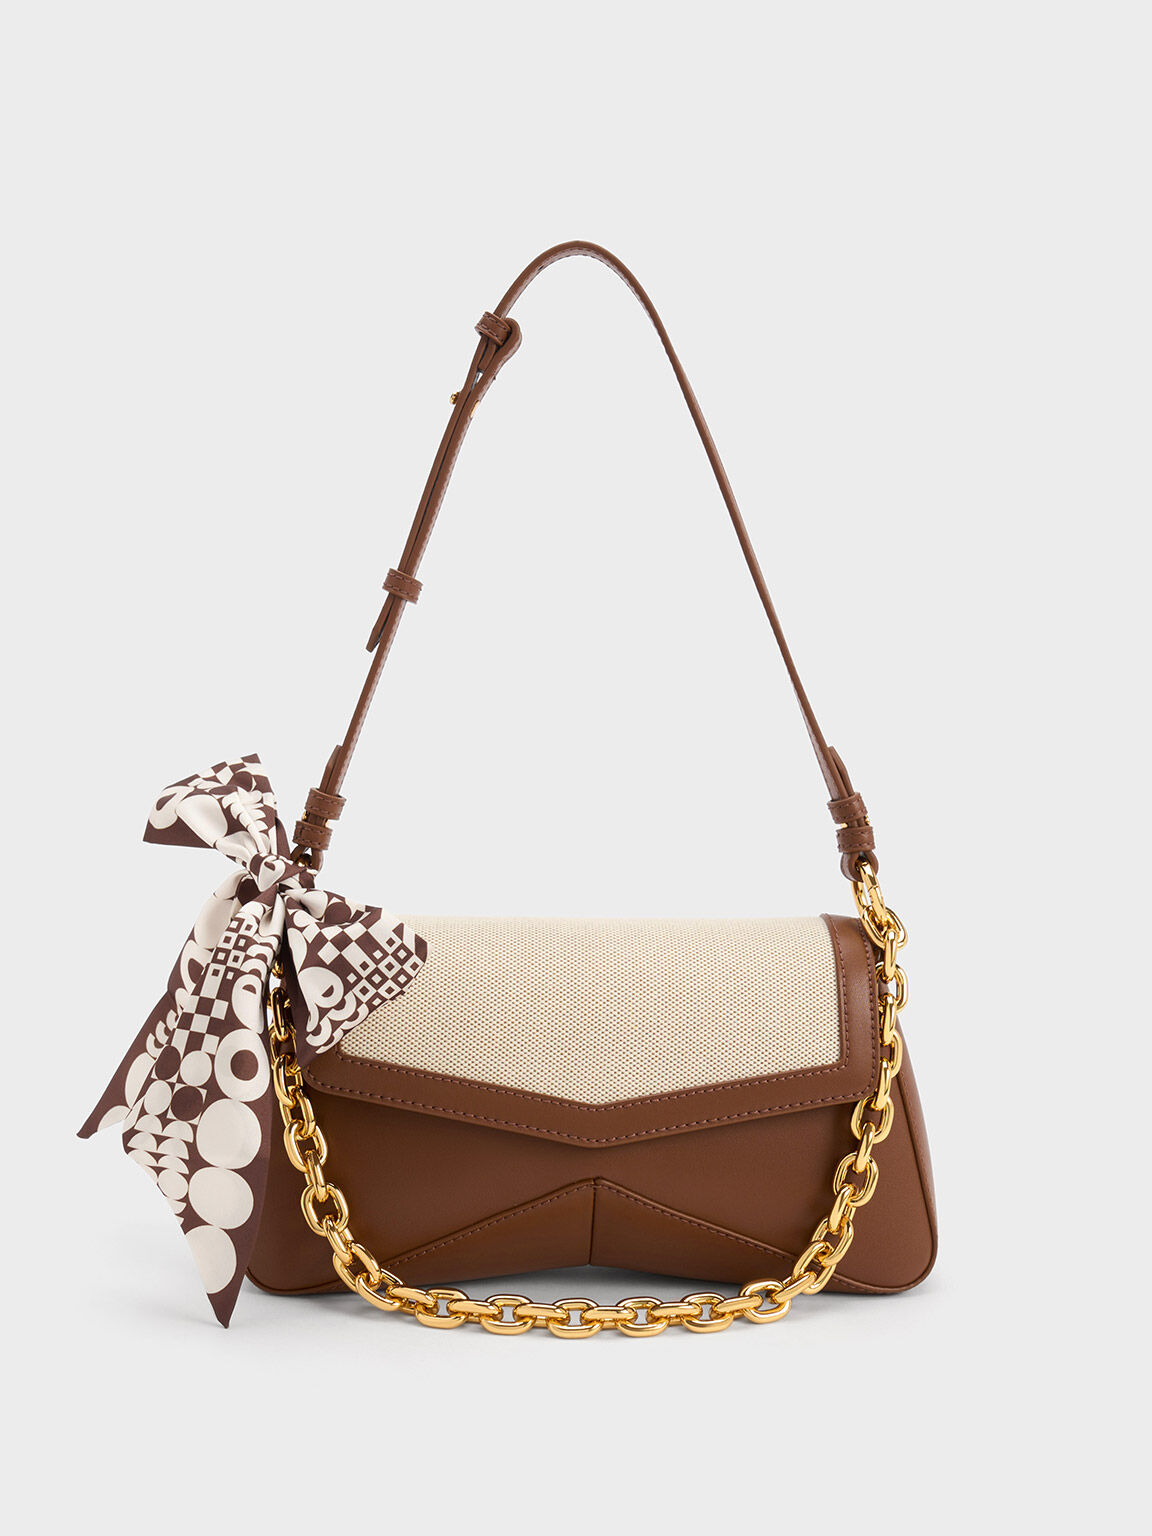 Arley Canvas Chain-Link Trapeze Bag, Chocolate, hi-res